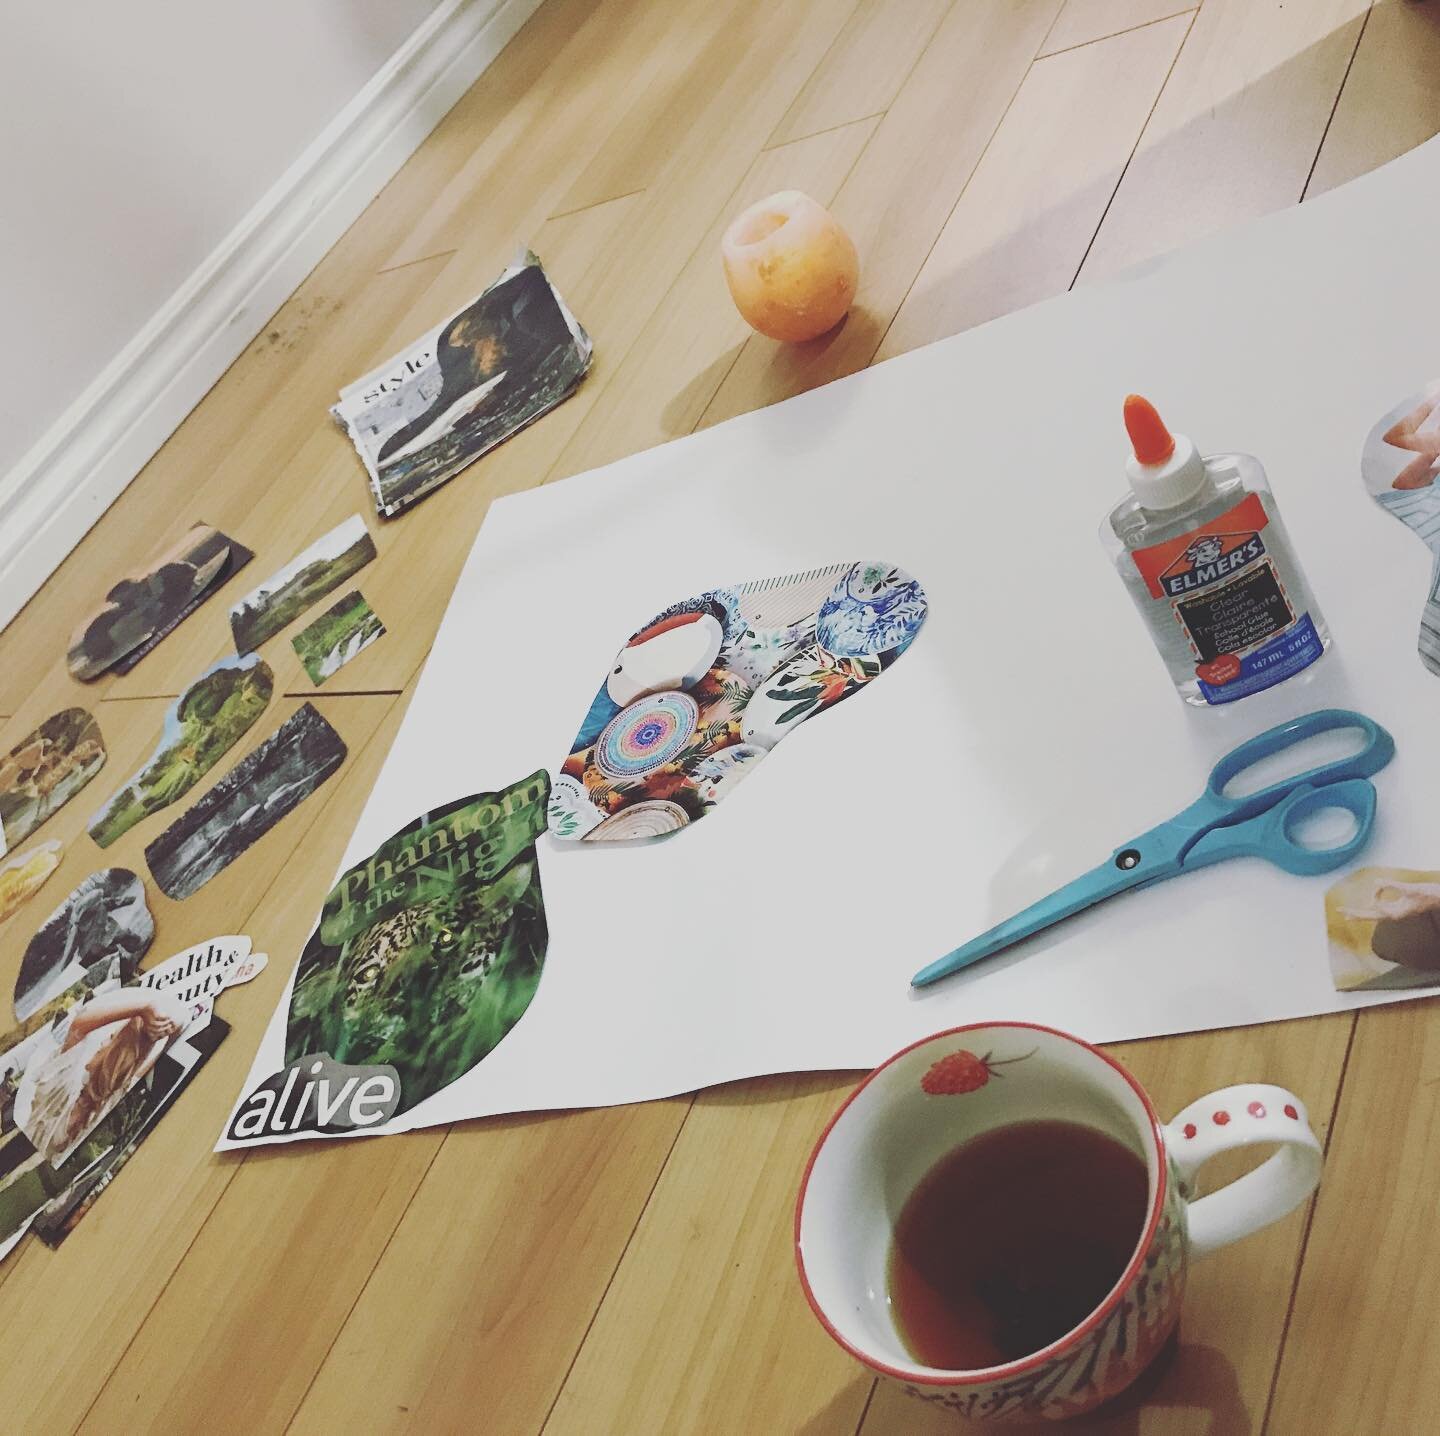 A client cancelled yesterday afternoon, so I stole a very rare and precious moment to finally complete my 2020 vision board. I often find it challenging as a mother, wife and entrepreneur to create space to slow down, get creative and crafty, and pla